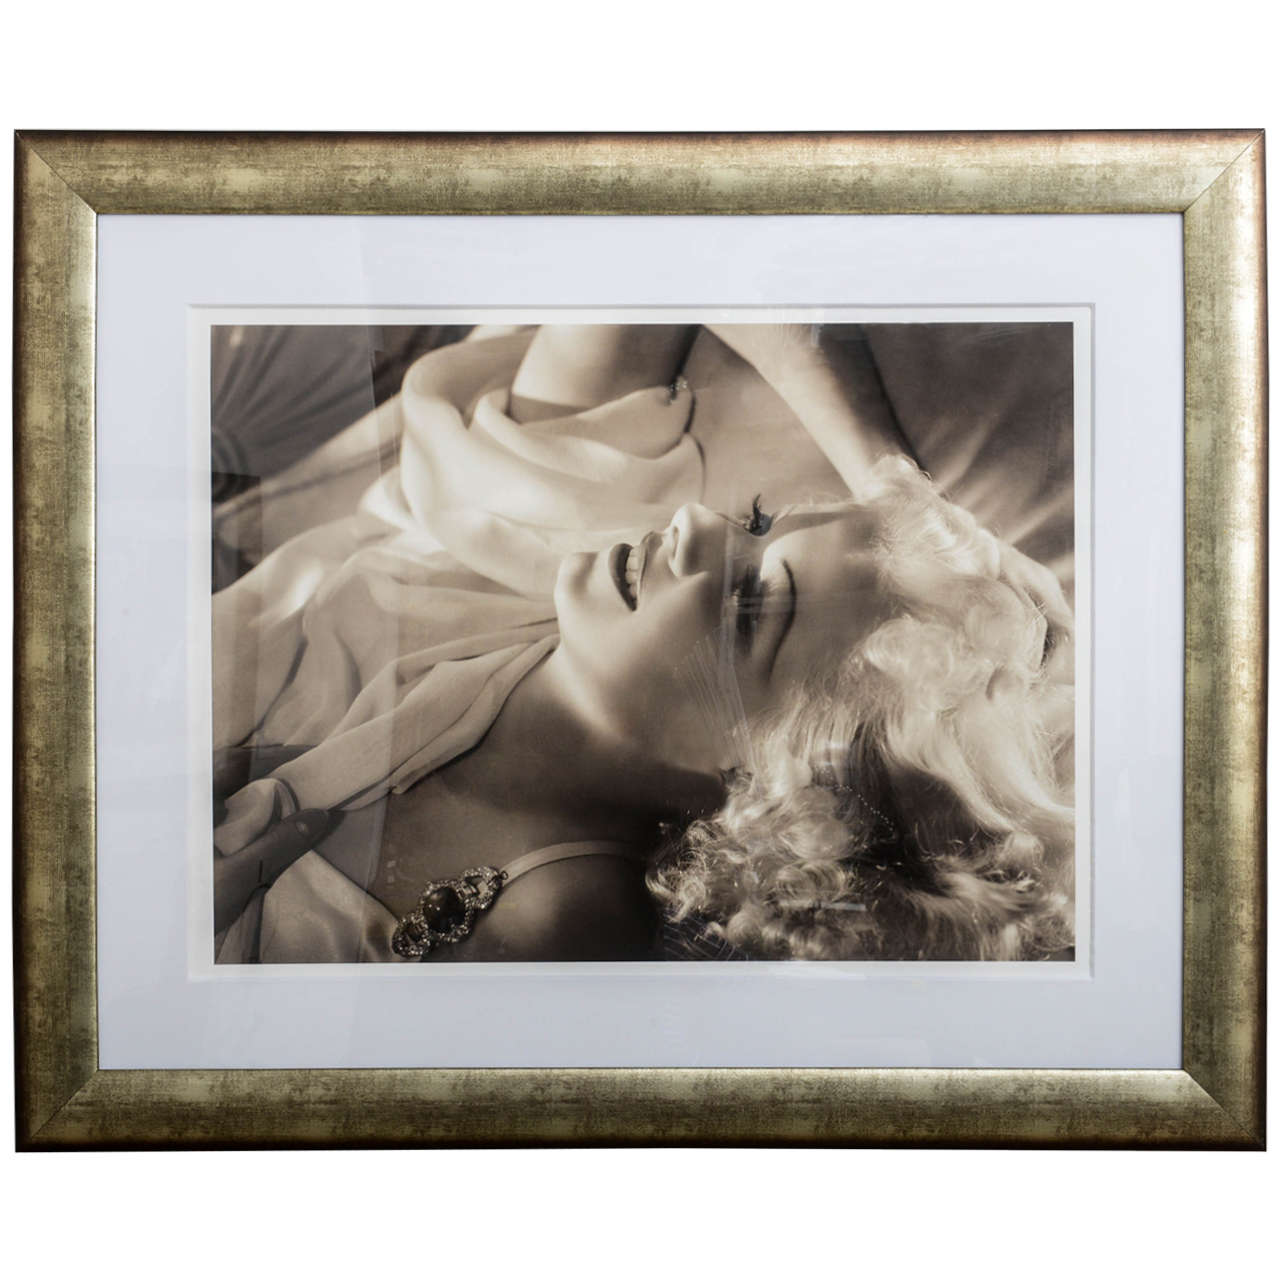 Framed Archival Pigment Print of Jean Harlow, George Hurrell, 1936